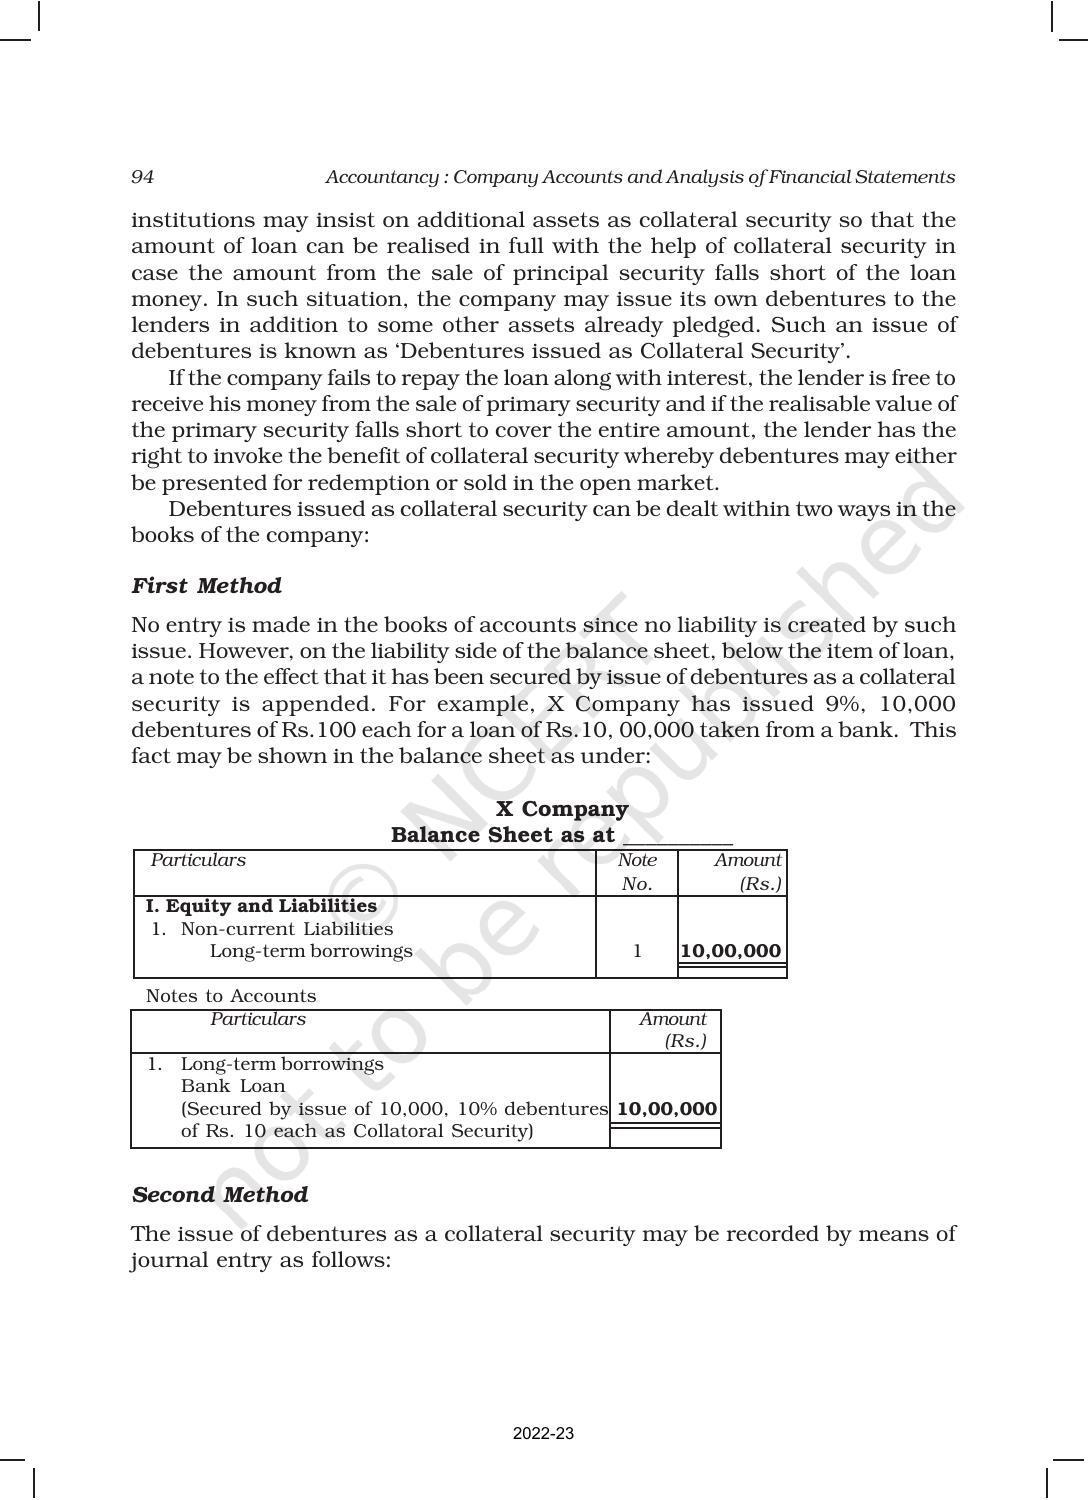 NCERT Book for Class 12 Accountancy Part II Chapter 1 Issue and Redemption of Debentures - Page 20